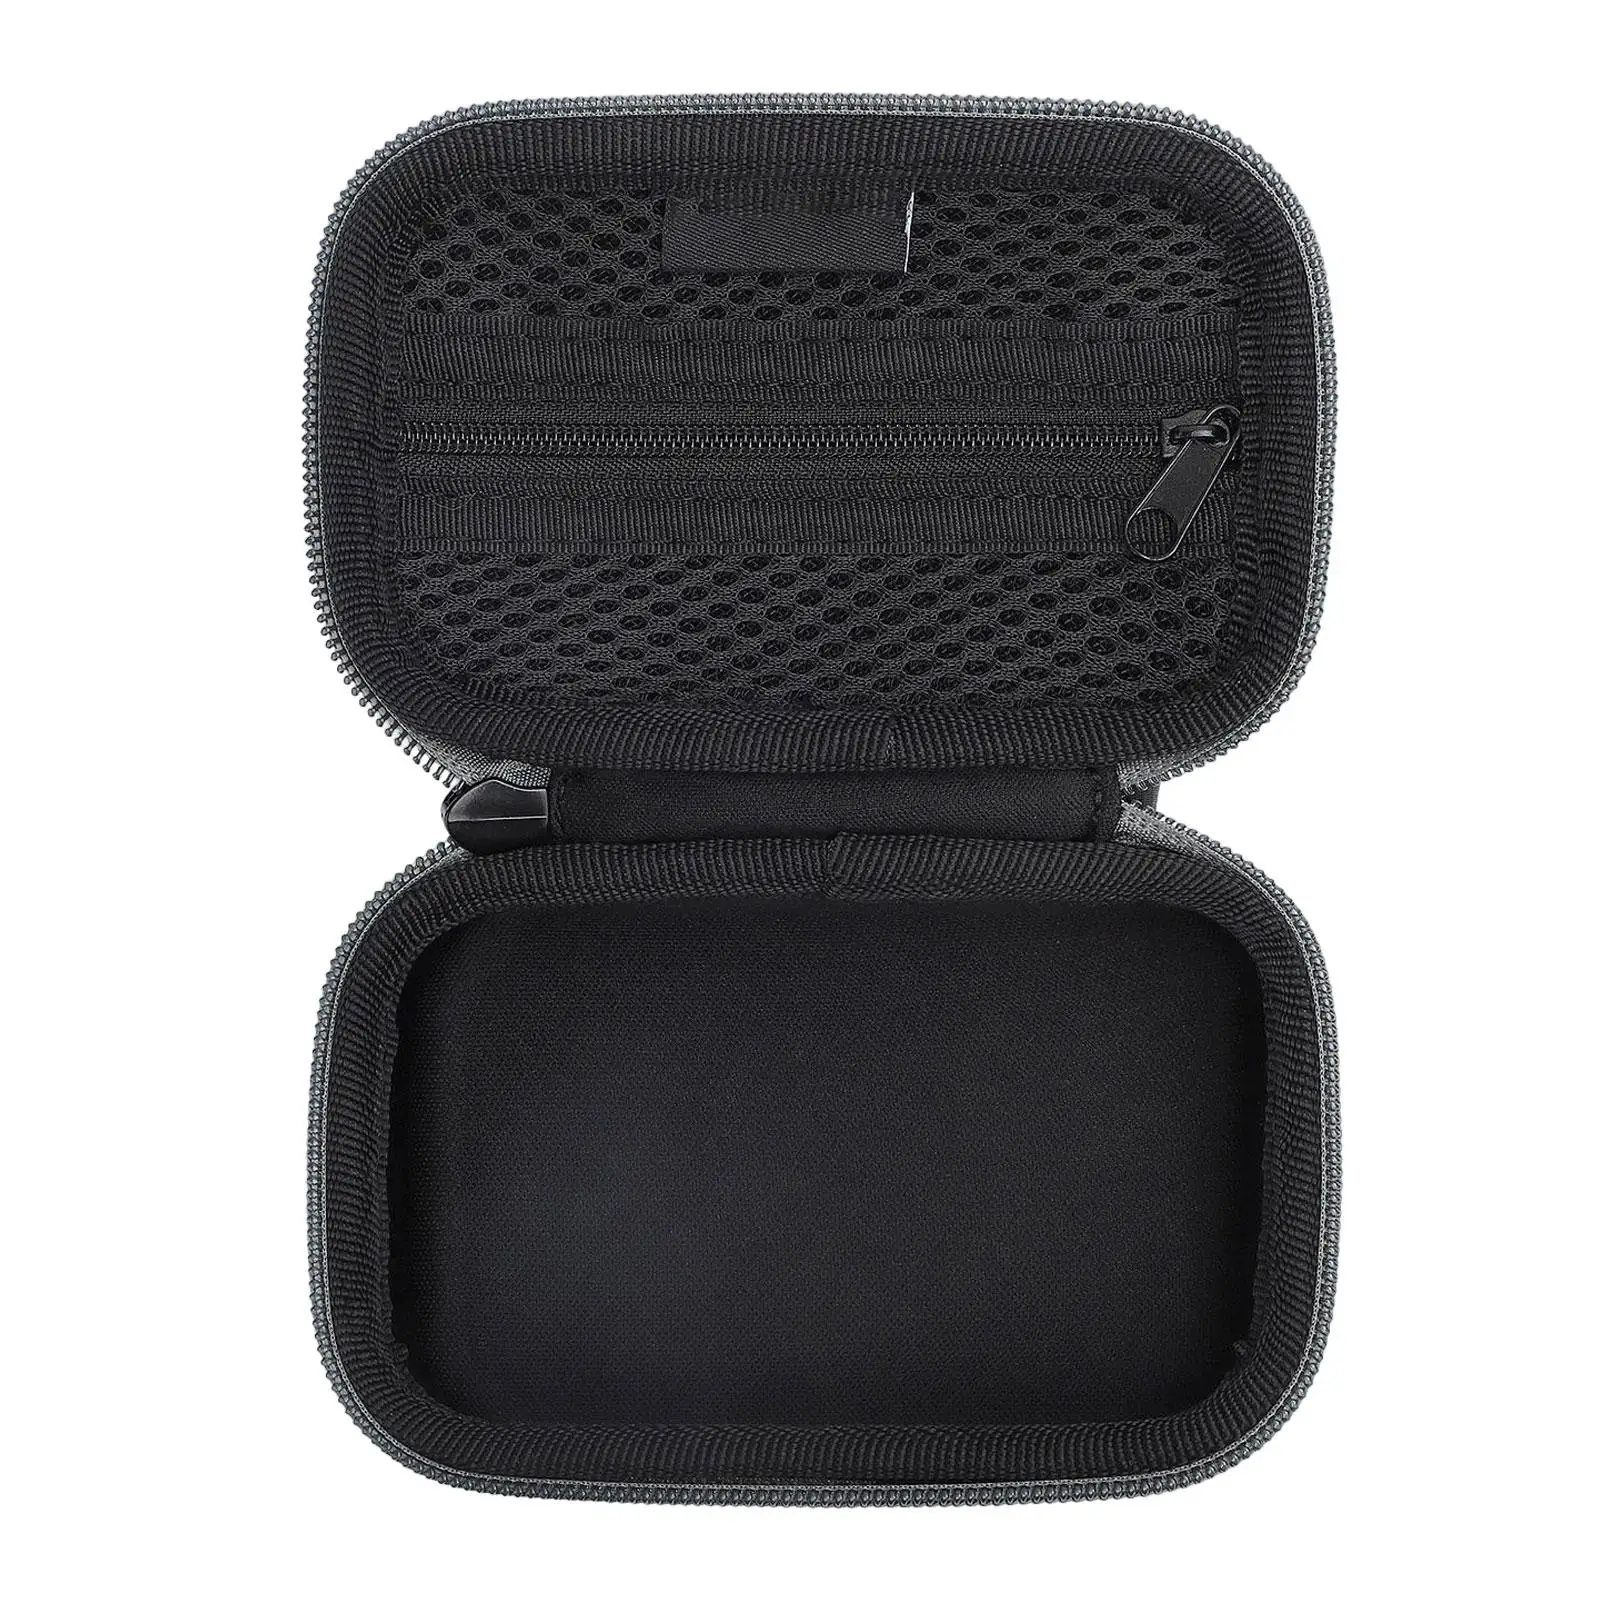 Portable Travel Protective Case Drone Bag for Quadcopter Drone RC Aircraft Accessories